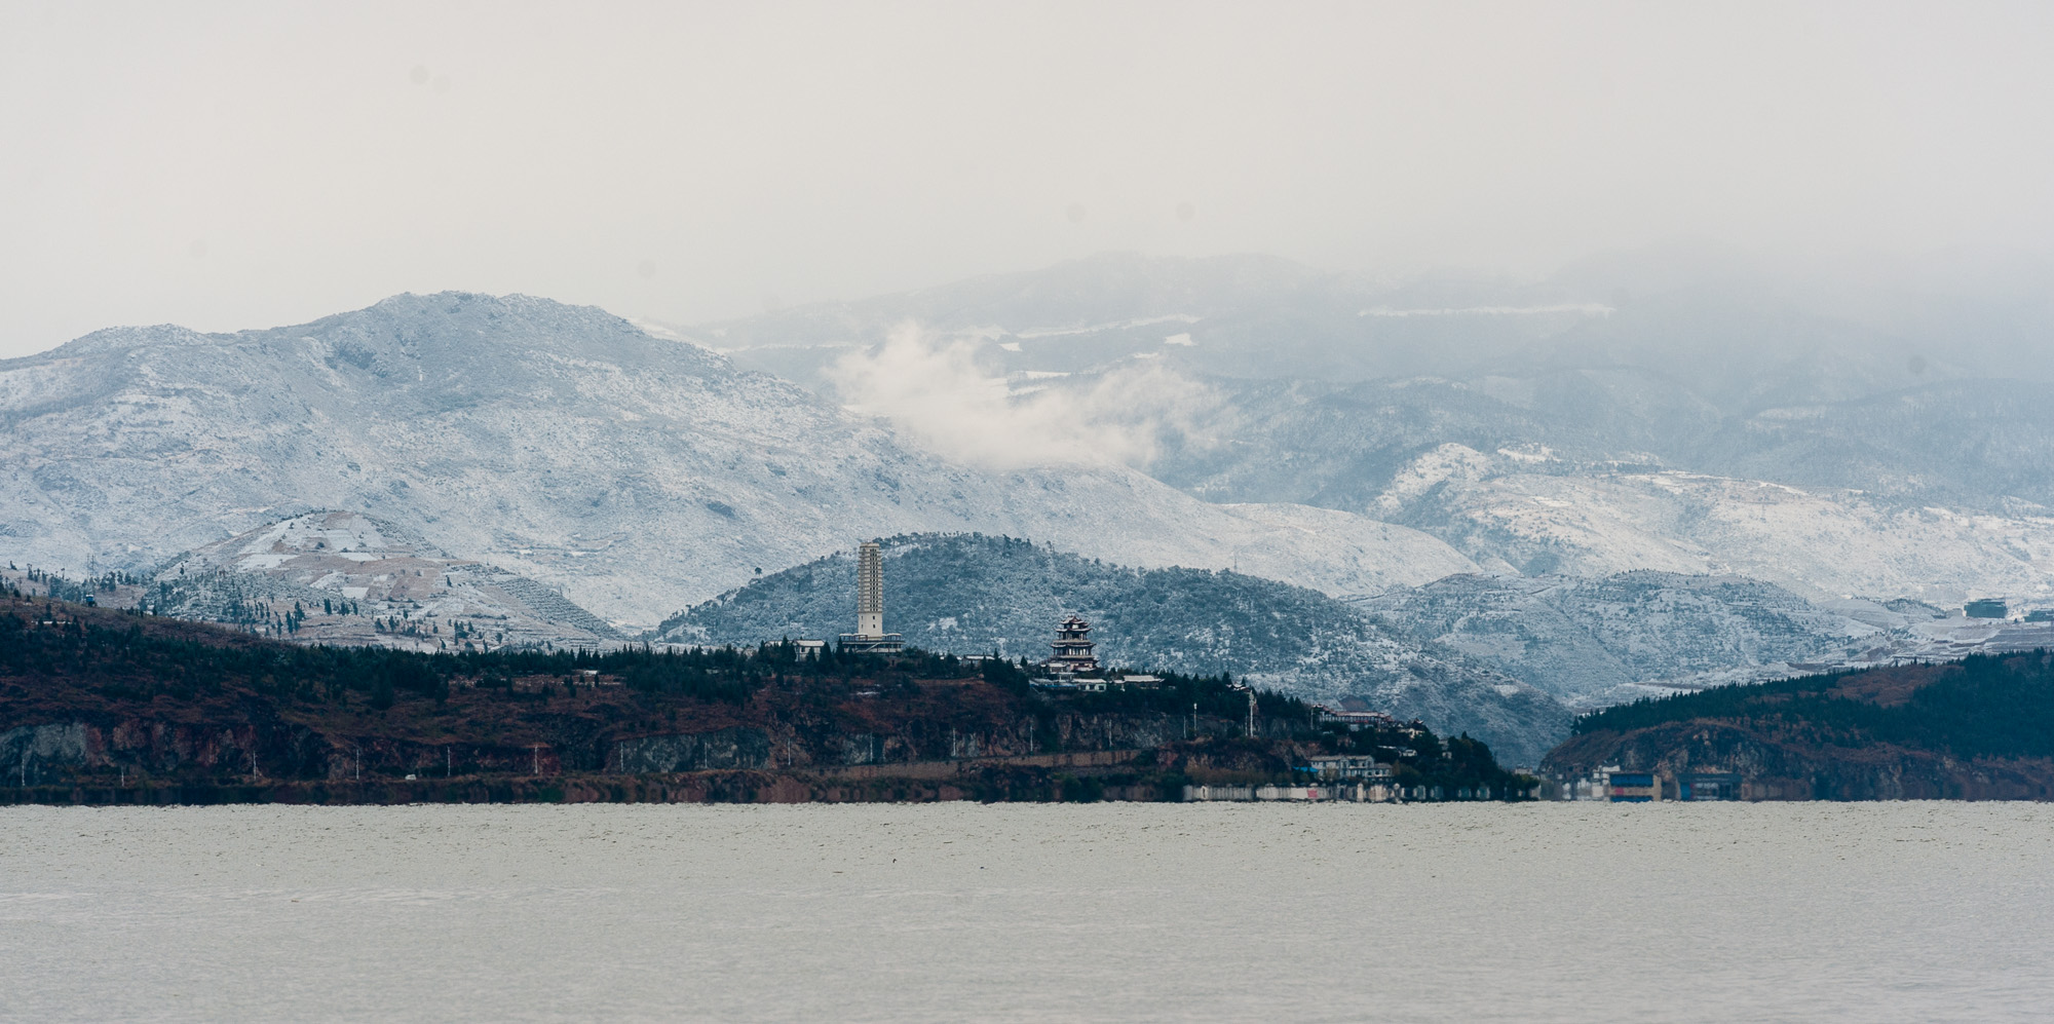 Picture: Luochuan Pagoda as see on a winter day from the western side of Erhai.